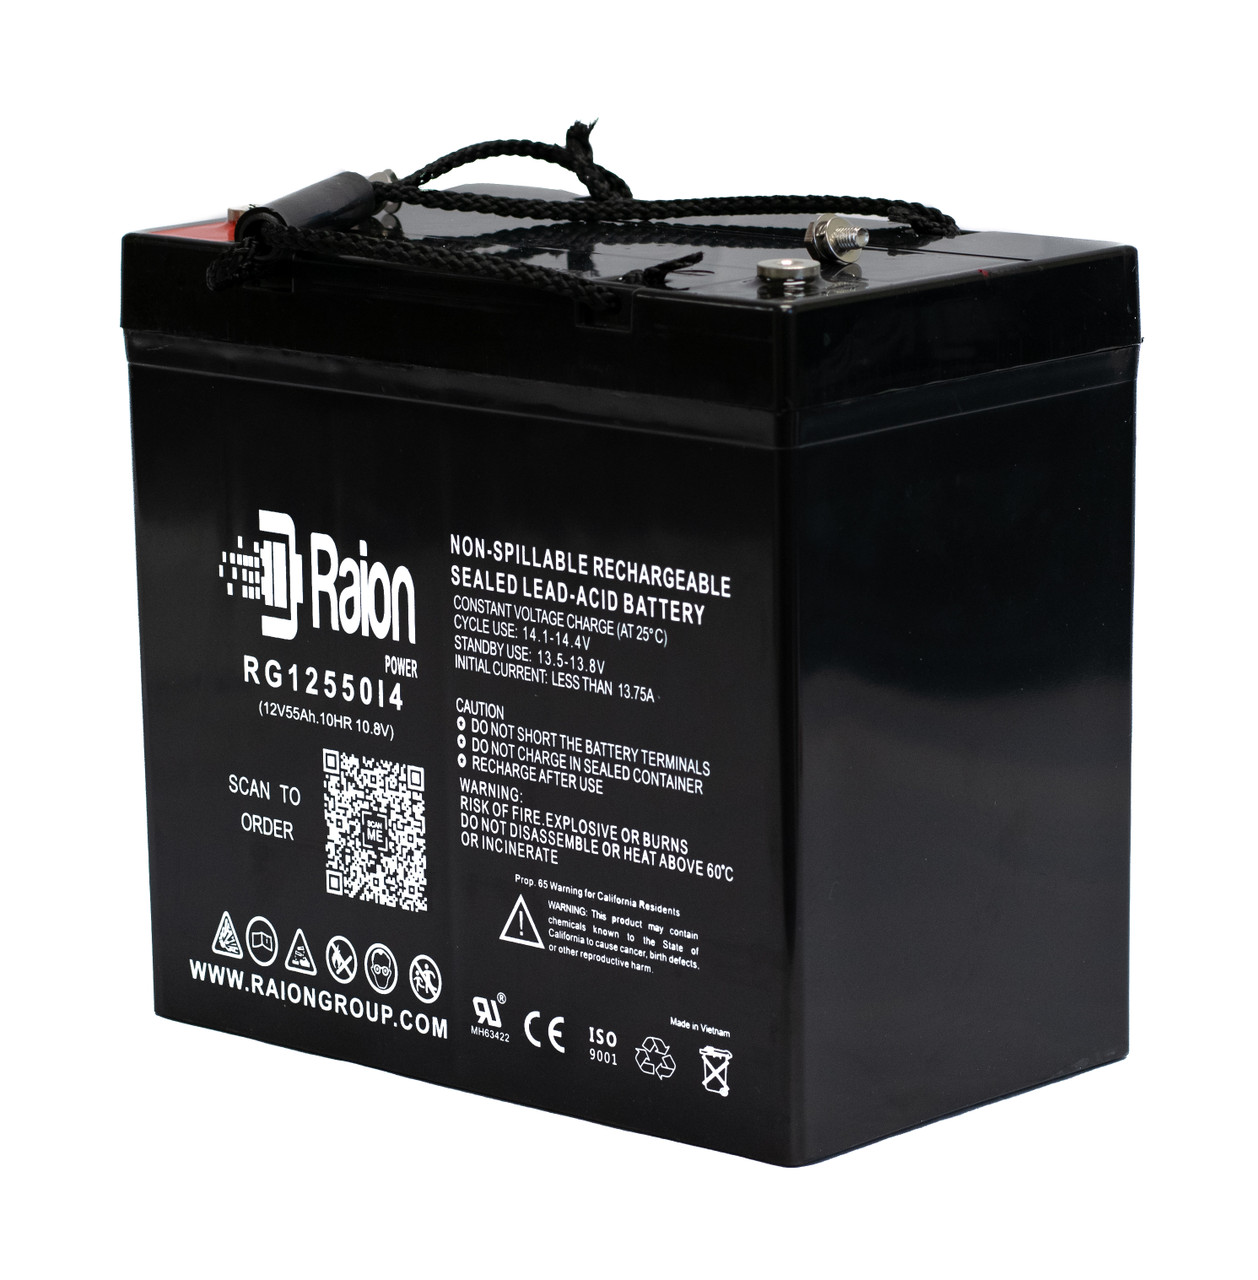 Raion Power 12V 55Ah 22NF Mobility Scooter Battery Replacement for Everest & Jennings Sprint Plus ES-GT